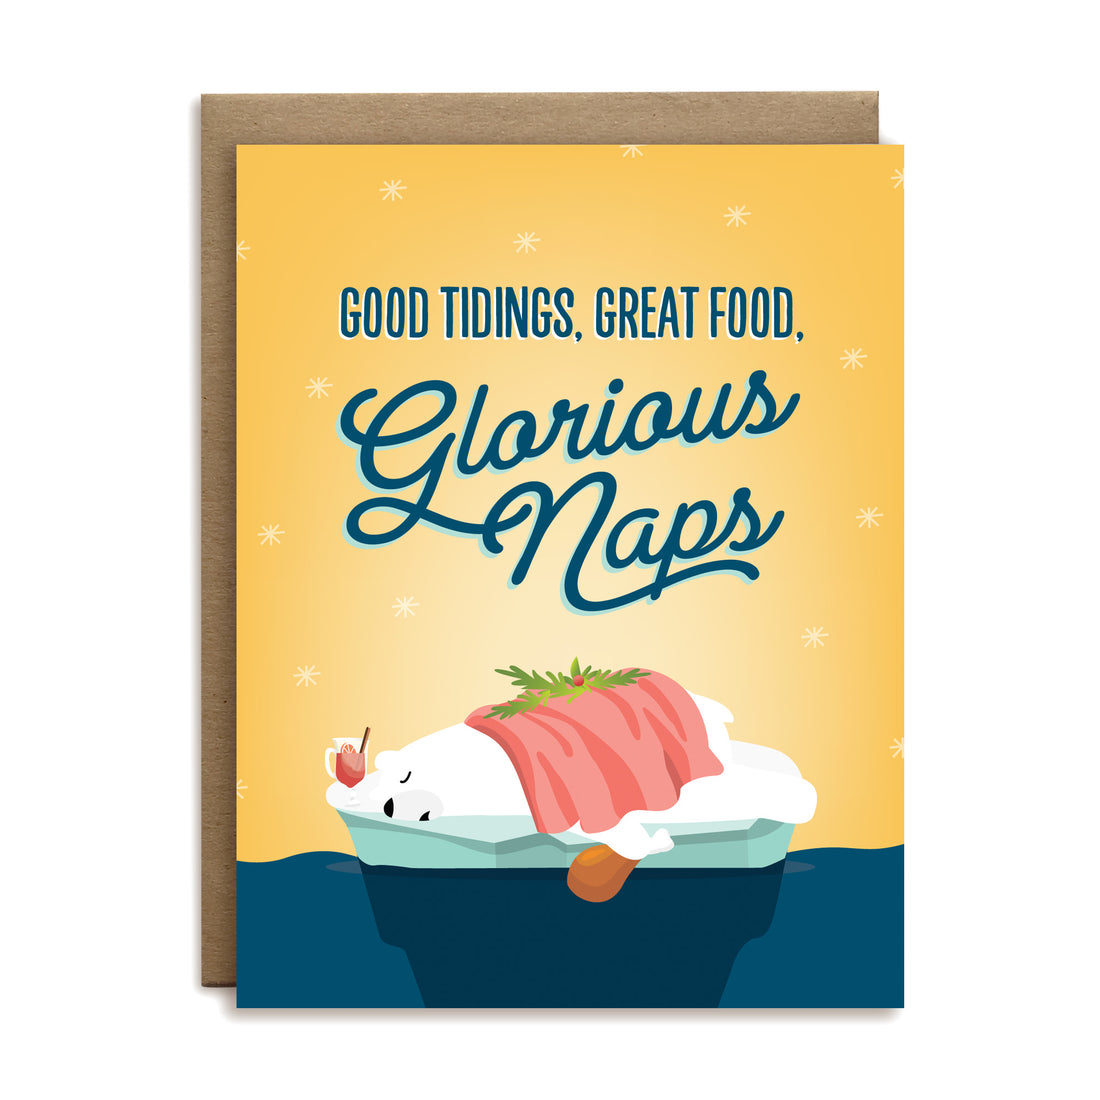 Good tidings, great food, glorious naps polar bear sleeping after meal holiday greeting card by I’ll Know It When I See It